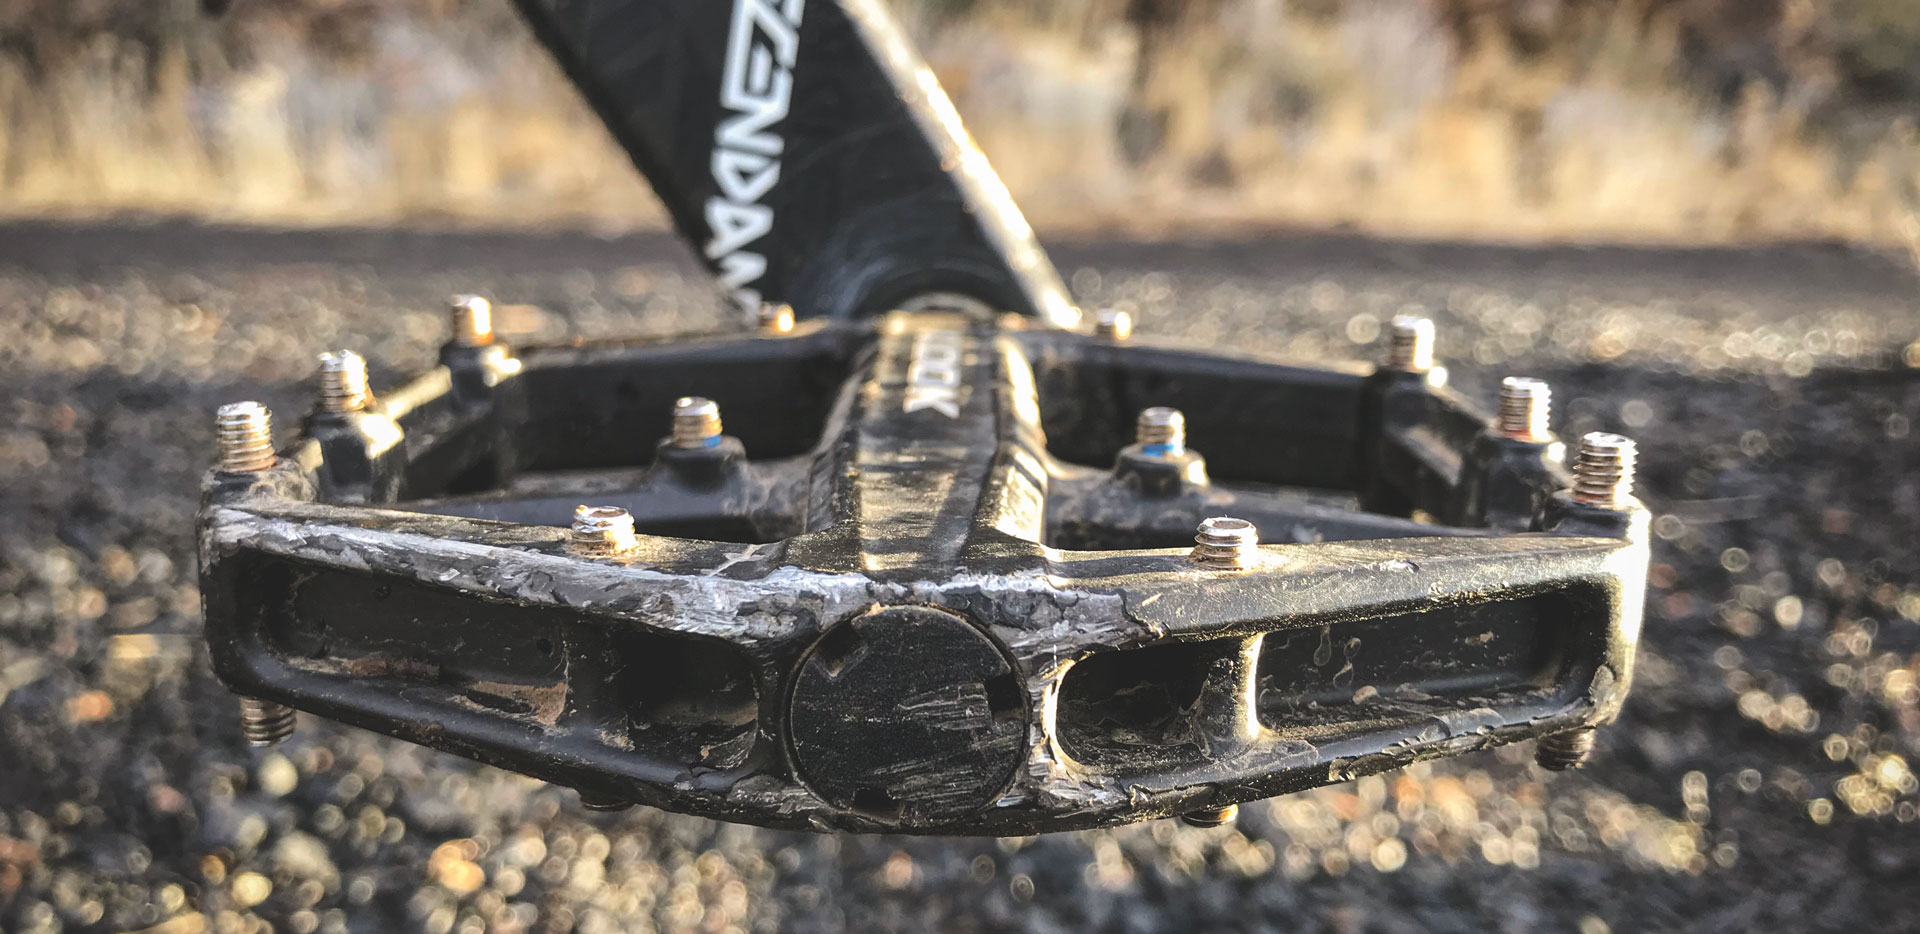 LOOK Trail ROC Pedal Review